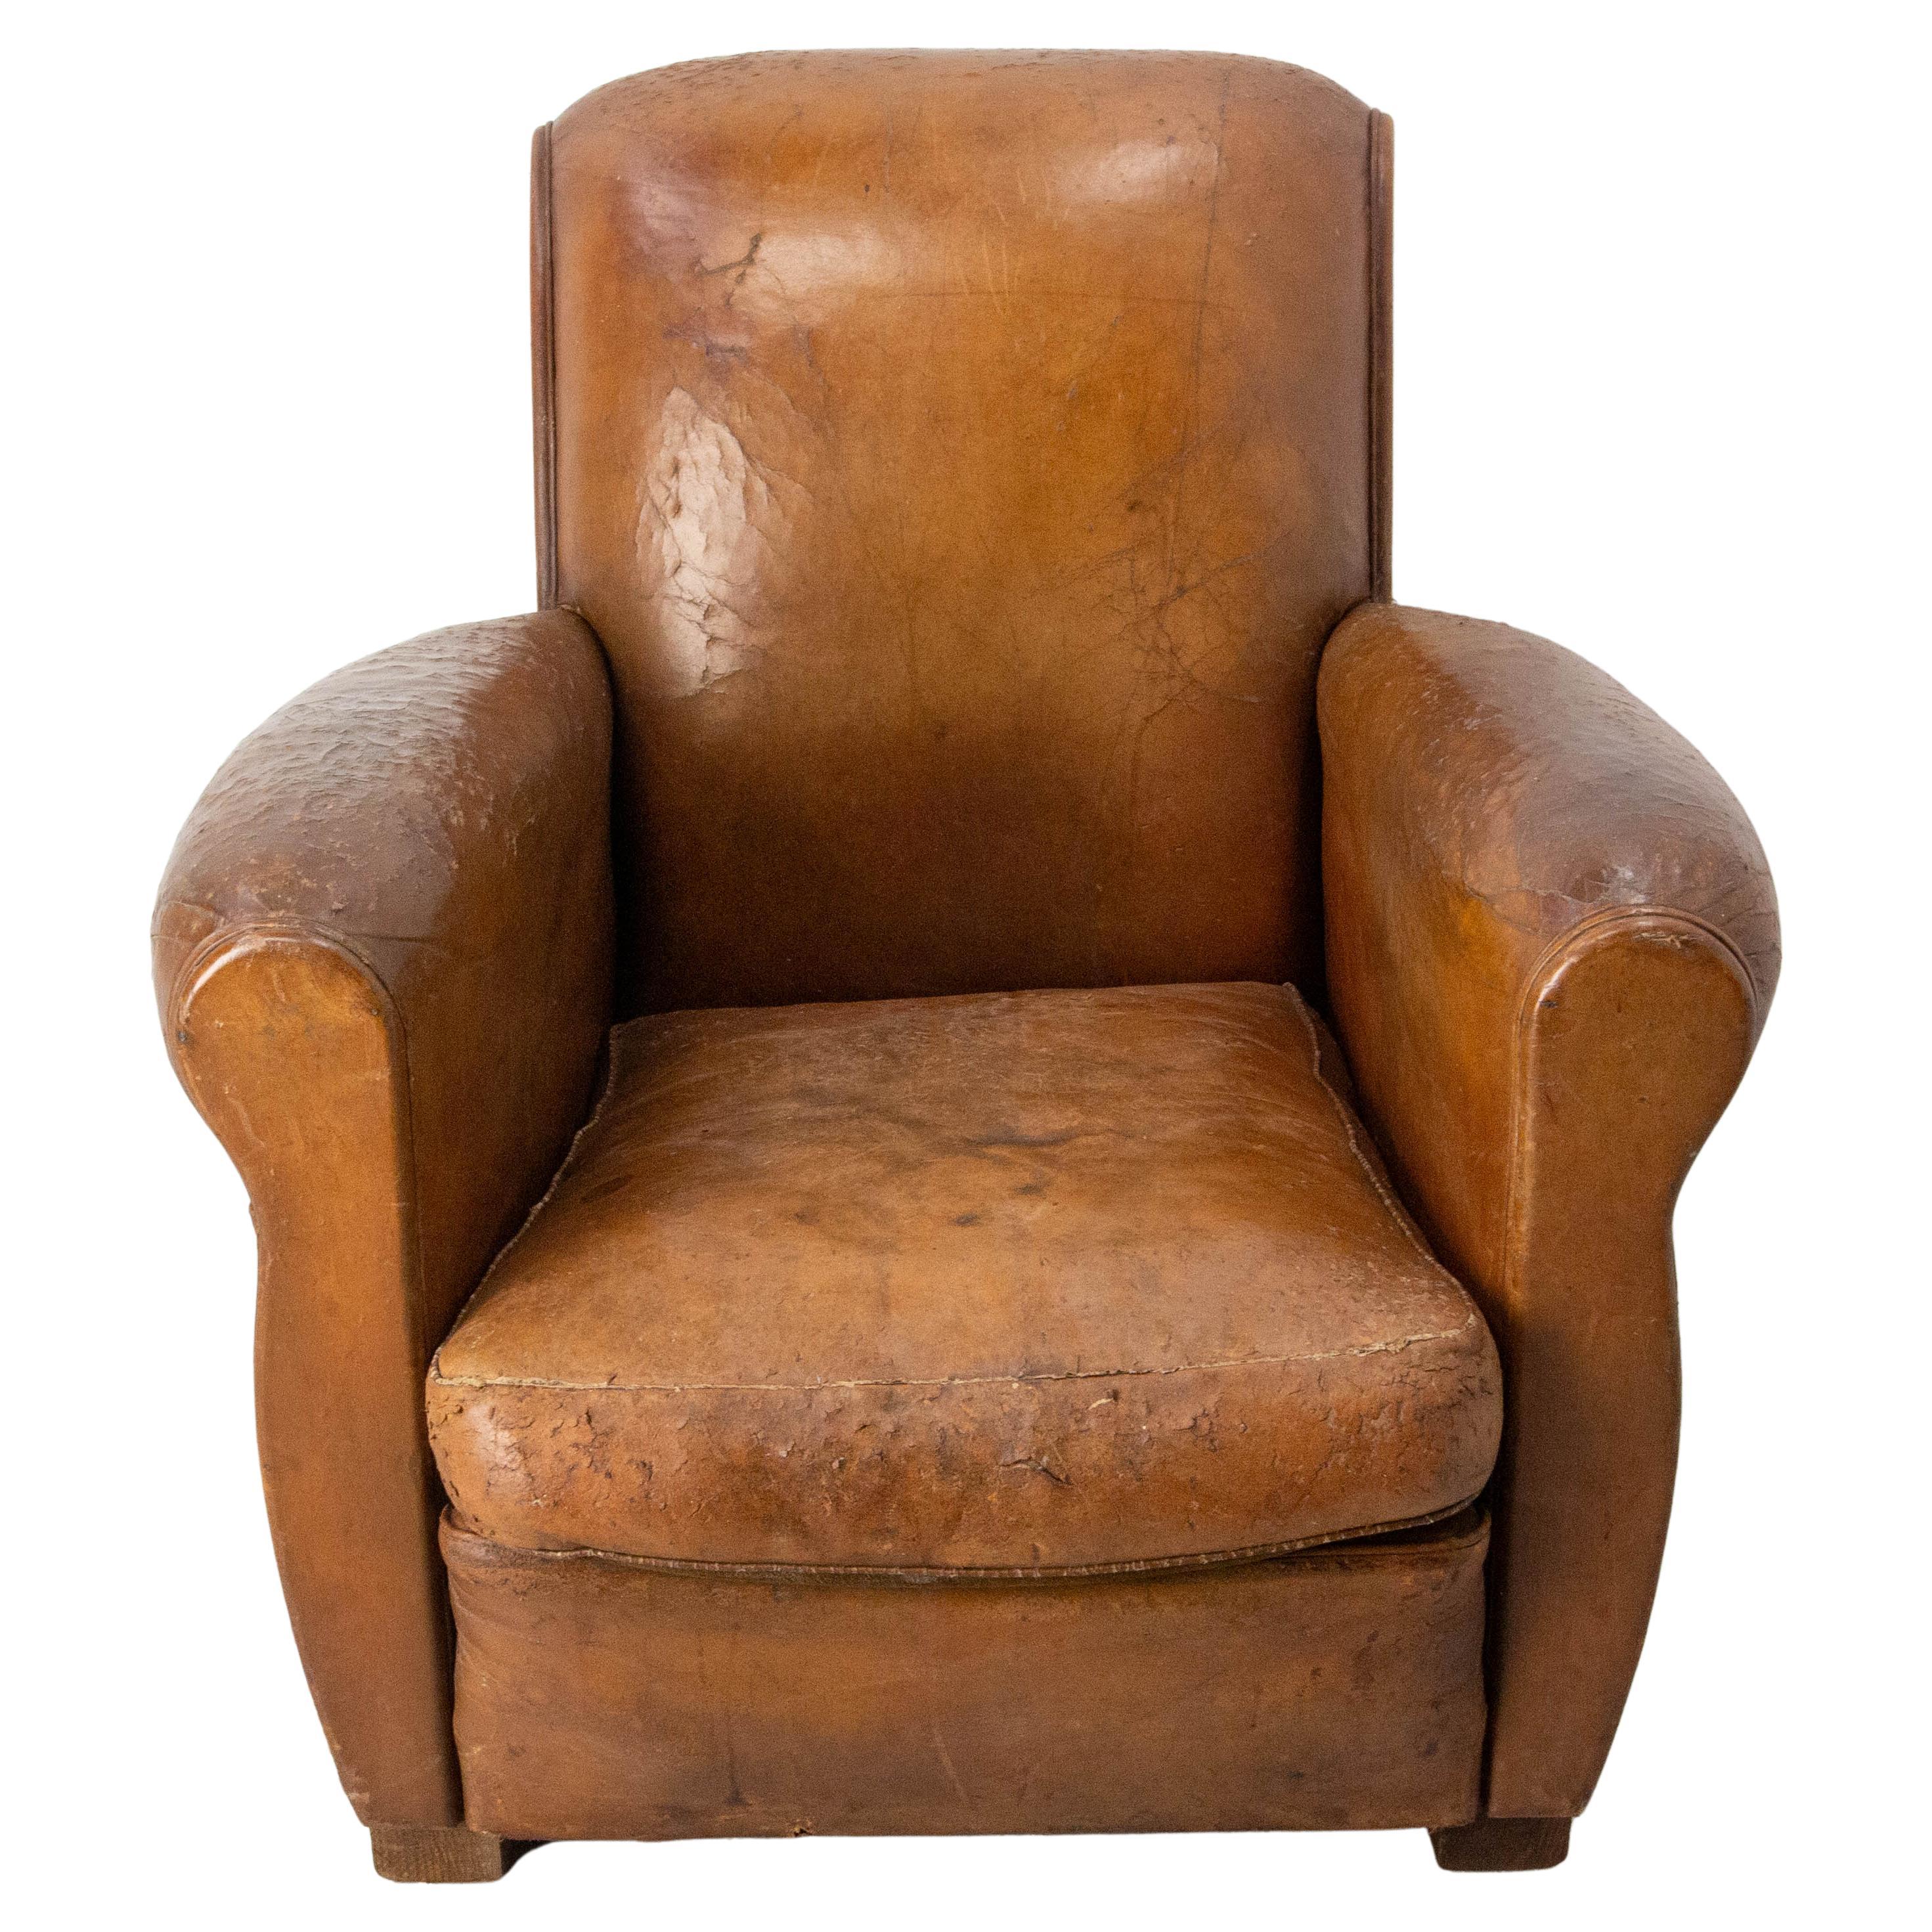 Antiquities Fauteuil Club Fauteuil Cognac Leather French or "Cats Chair", circa 1930